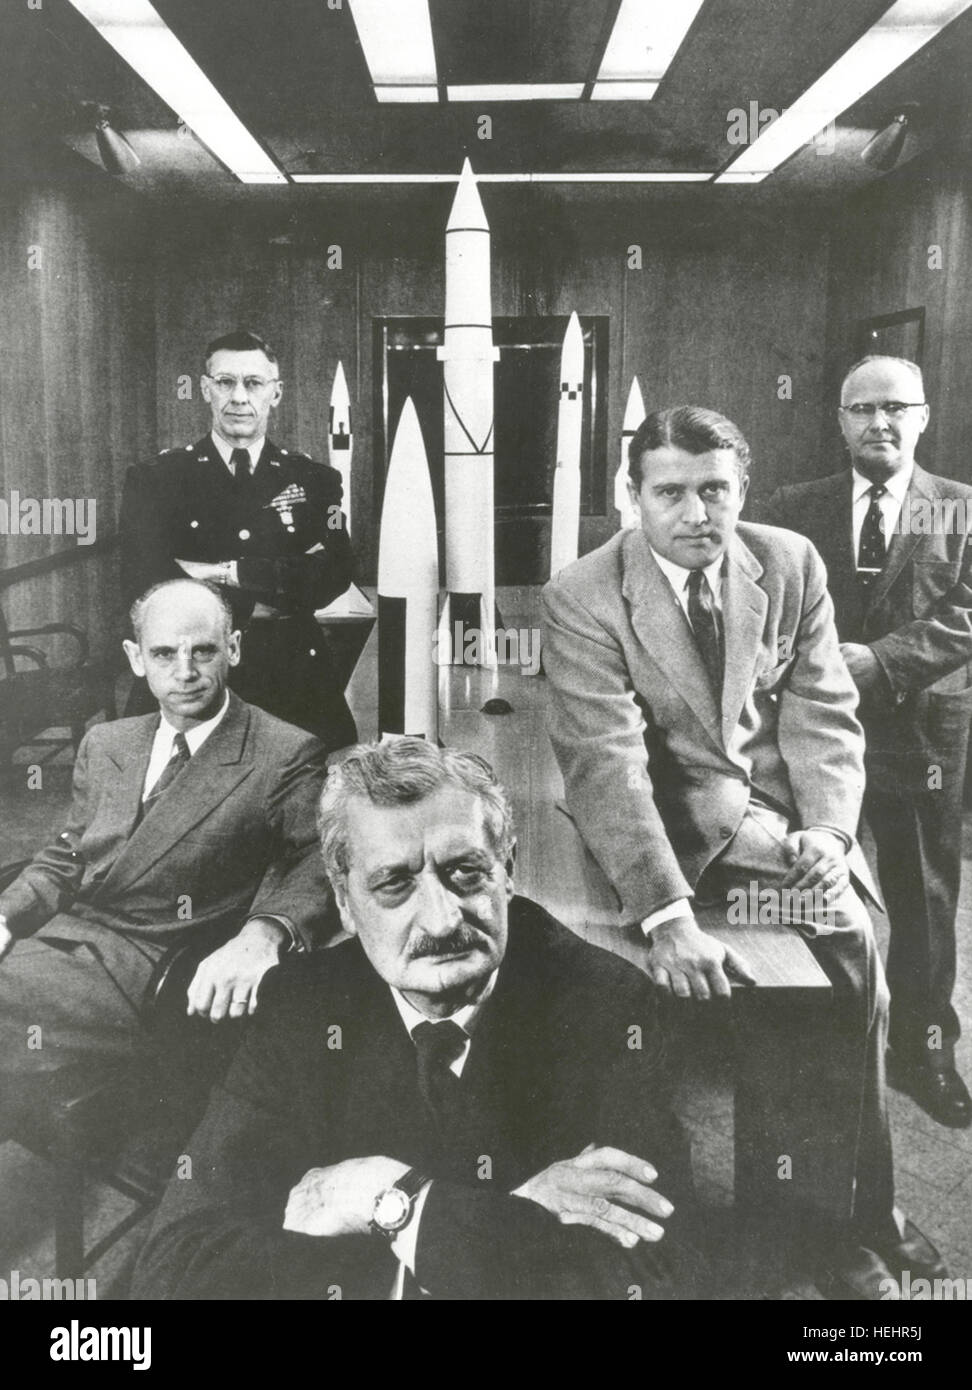 Hermann Oberth (forefront) with officials of the Army Ballistic Missile Agency at Huntsville, Alabama in 1956. Left to right around Oberth: 1) Dr. Ernst Stuhlinger (seated). 2) Major General H.N. Toftoy, Commanding Officer and person responsible for 'Project Paperclip,' which took scientists and engineers out of Germany after World War II to design rockets for American military use. Many of the scientists later helped to design the Saturn V rocket that took the Apollo 11 astronauts to the Moon. 3) Dr. Robert Lusser, a Project Paperclip engineer who returned to Germany in 1959. (Note: Lusser is Stock Photo